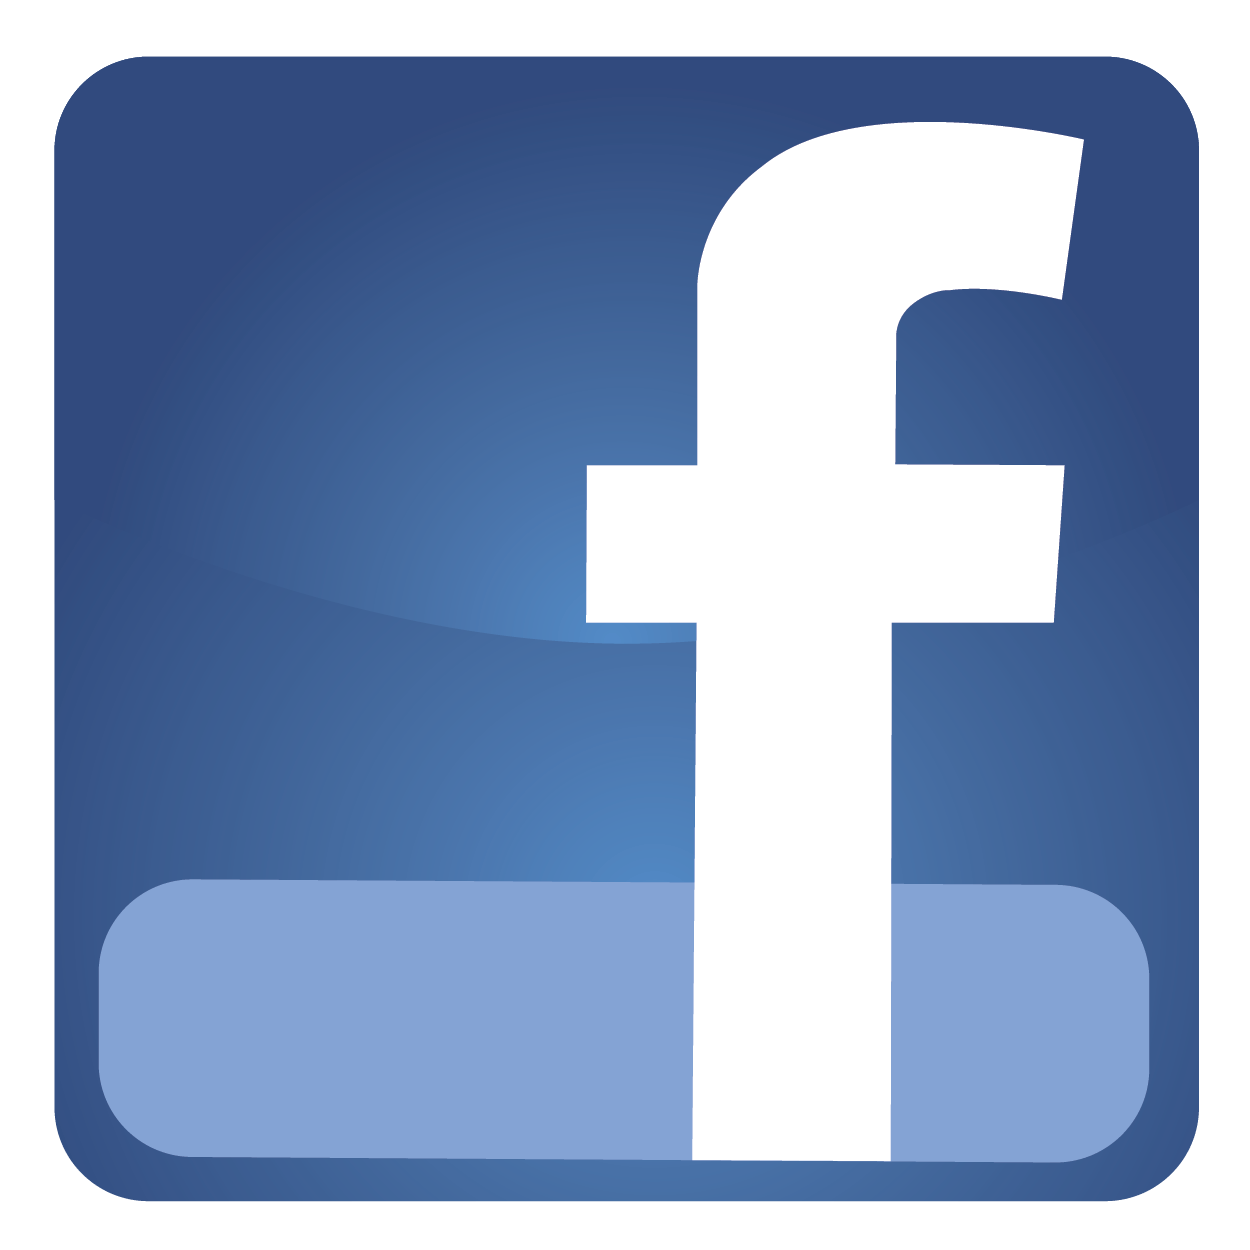 Follow Me On Facebook Logo - Facebook Free Vector Icon and PNG Background